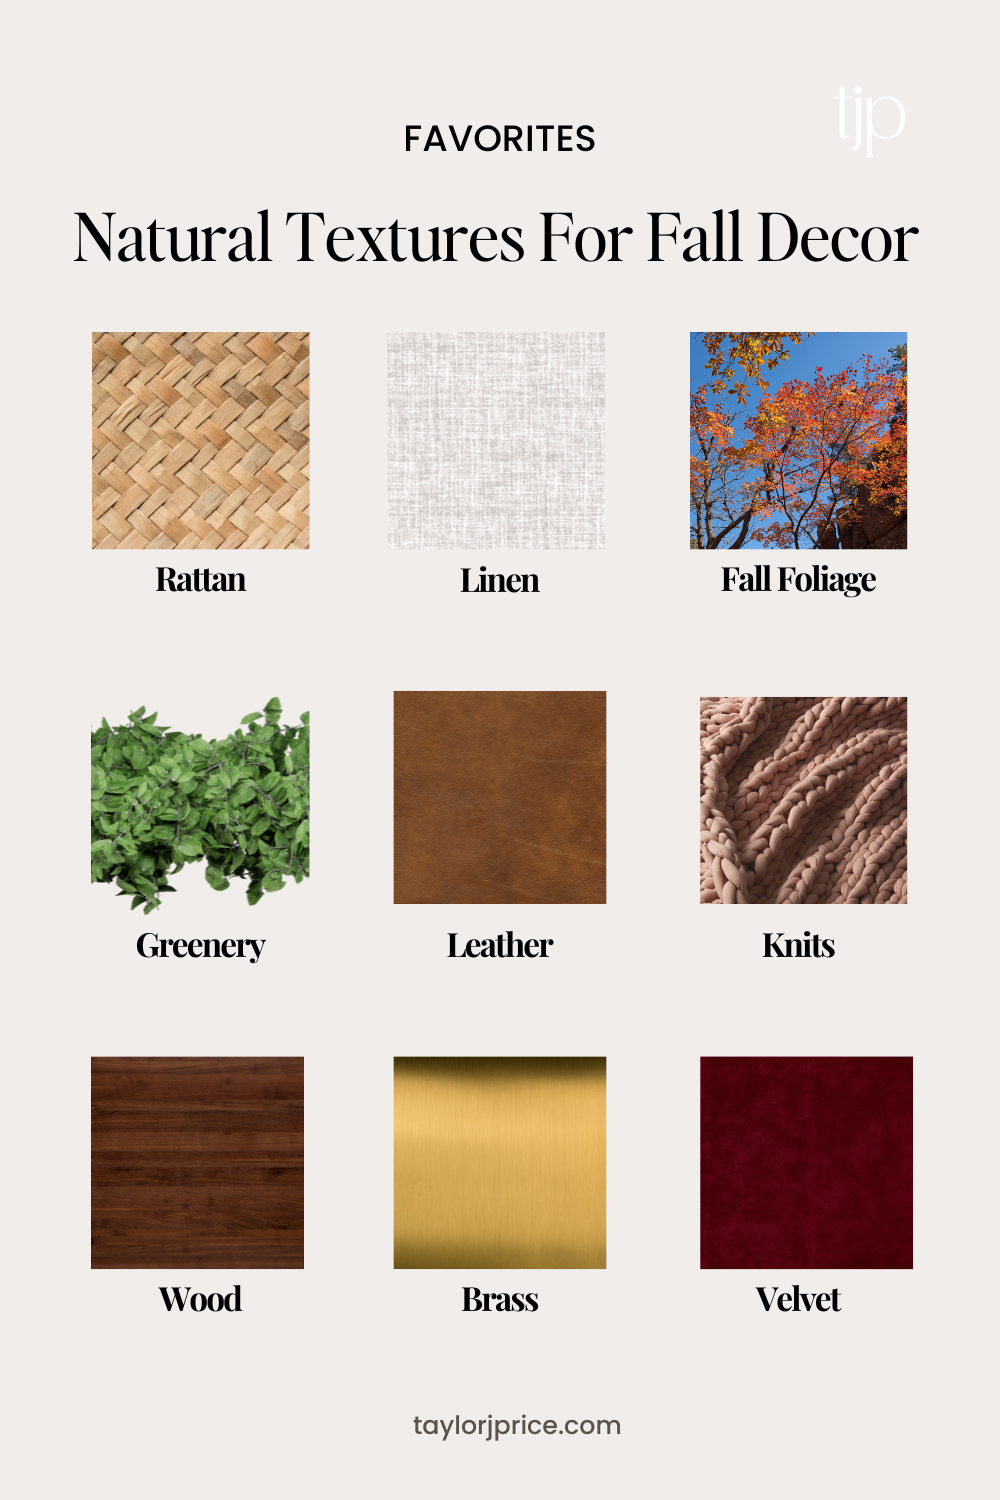 Examples of textures that can be used for a harvest tablescape in this order: rattan, linen, fall foliage, greenery, leather, knits, wood, brass, velvet